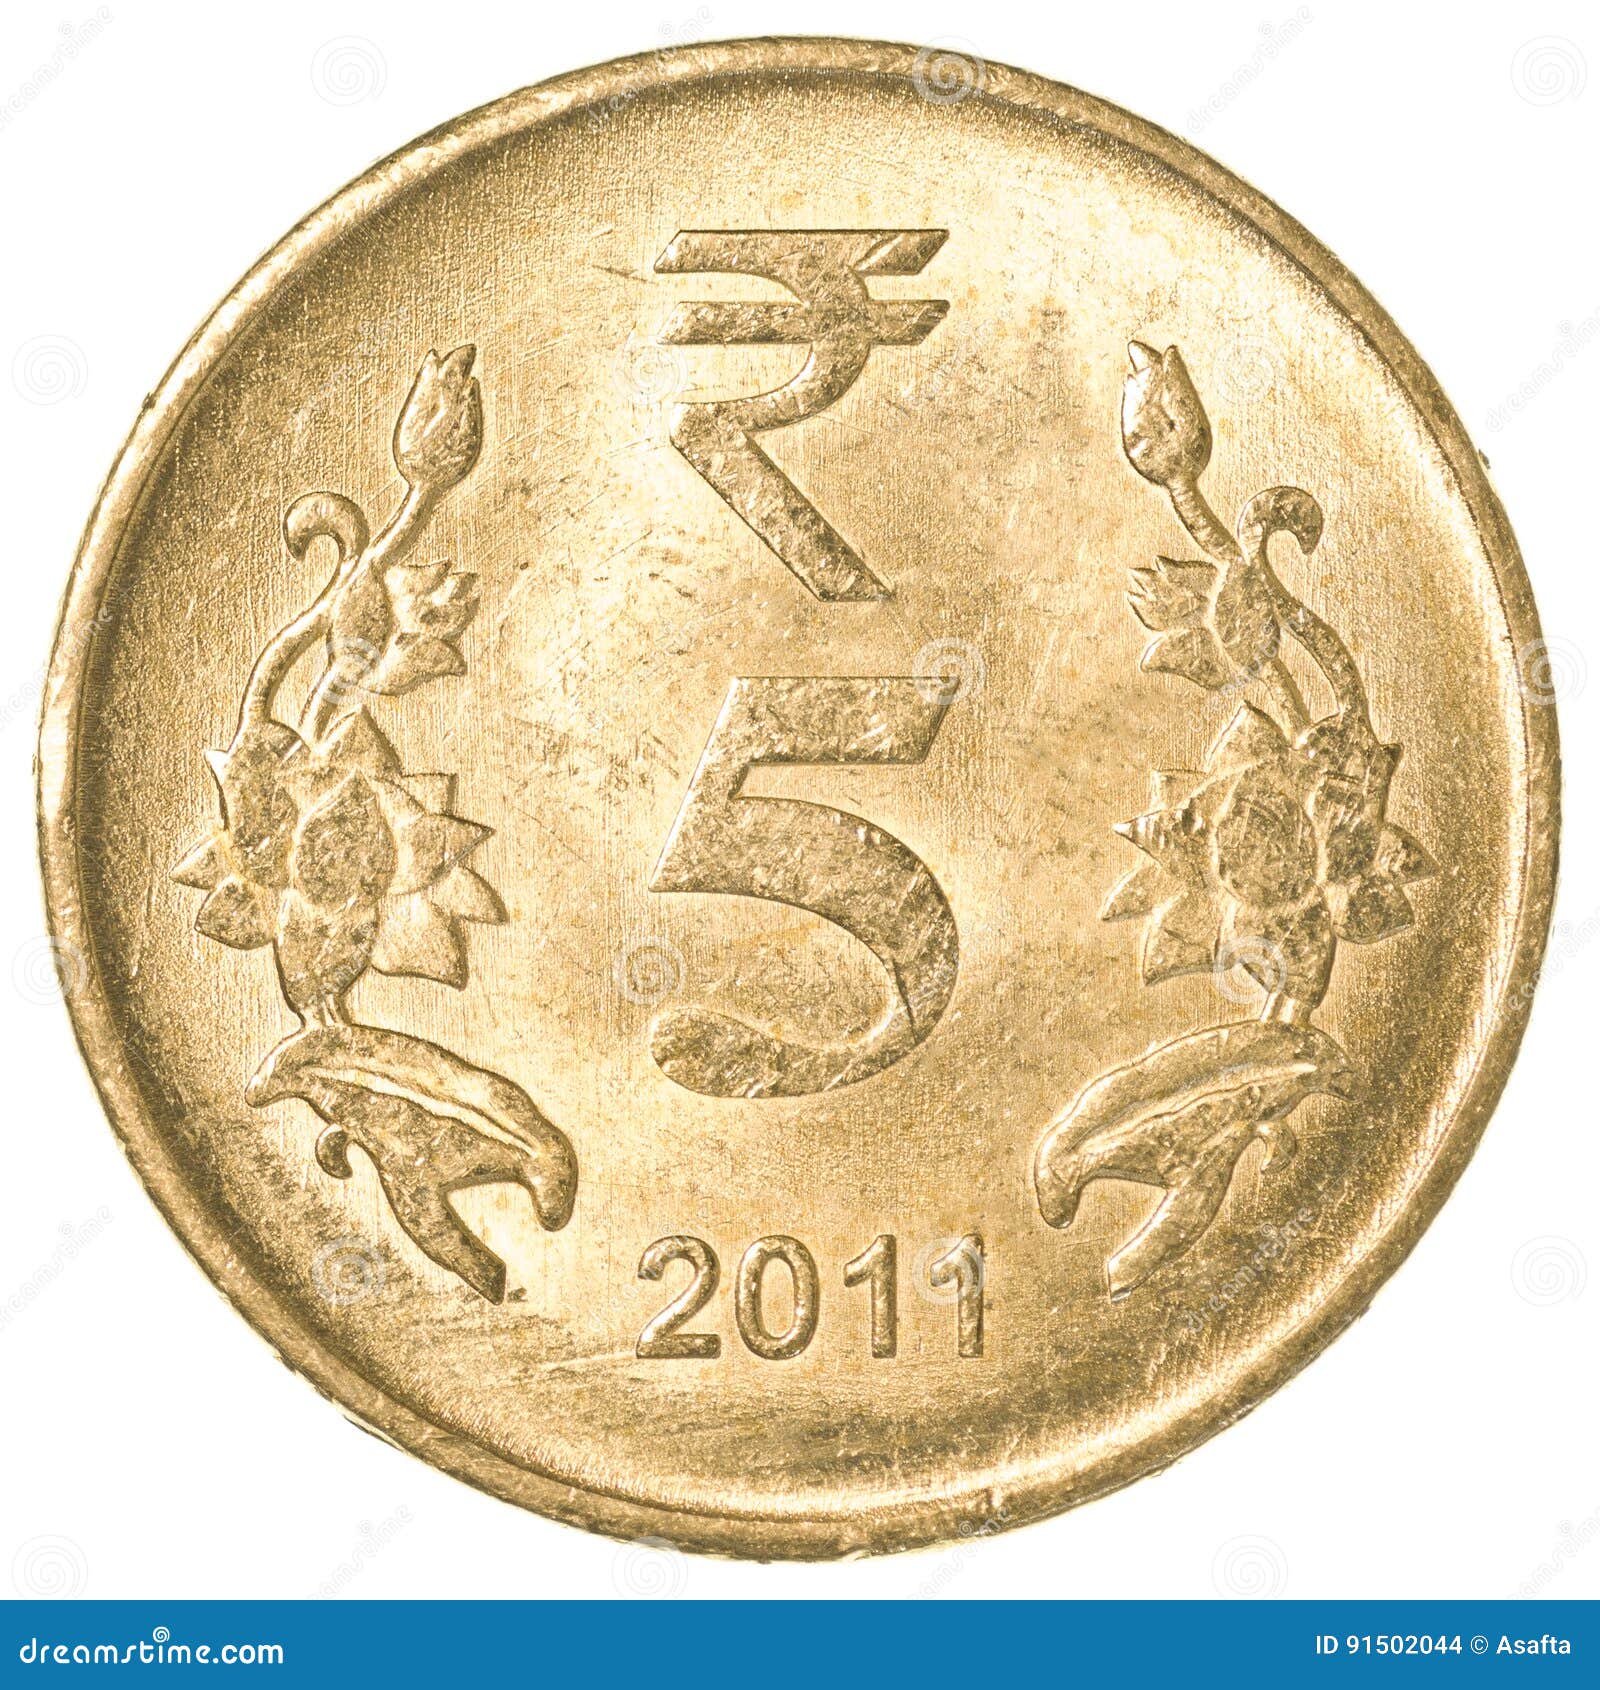 5 indian rupees coin stock photo. Image of exchange, background - 91502044